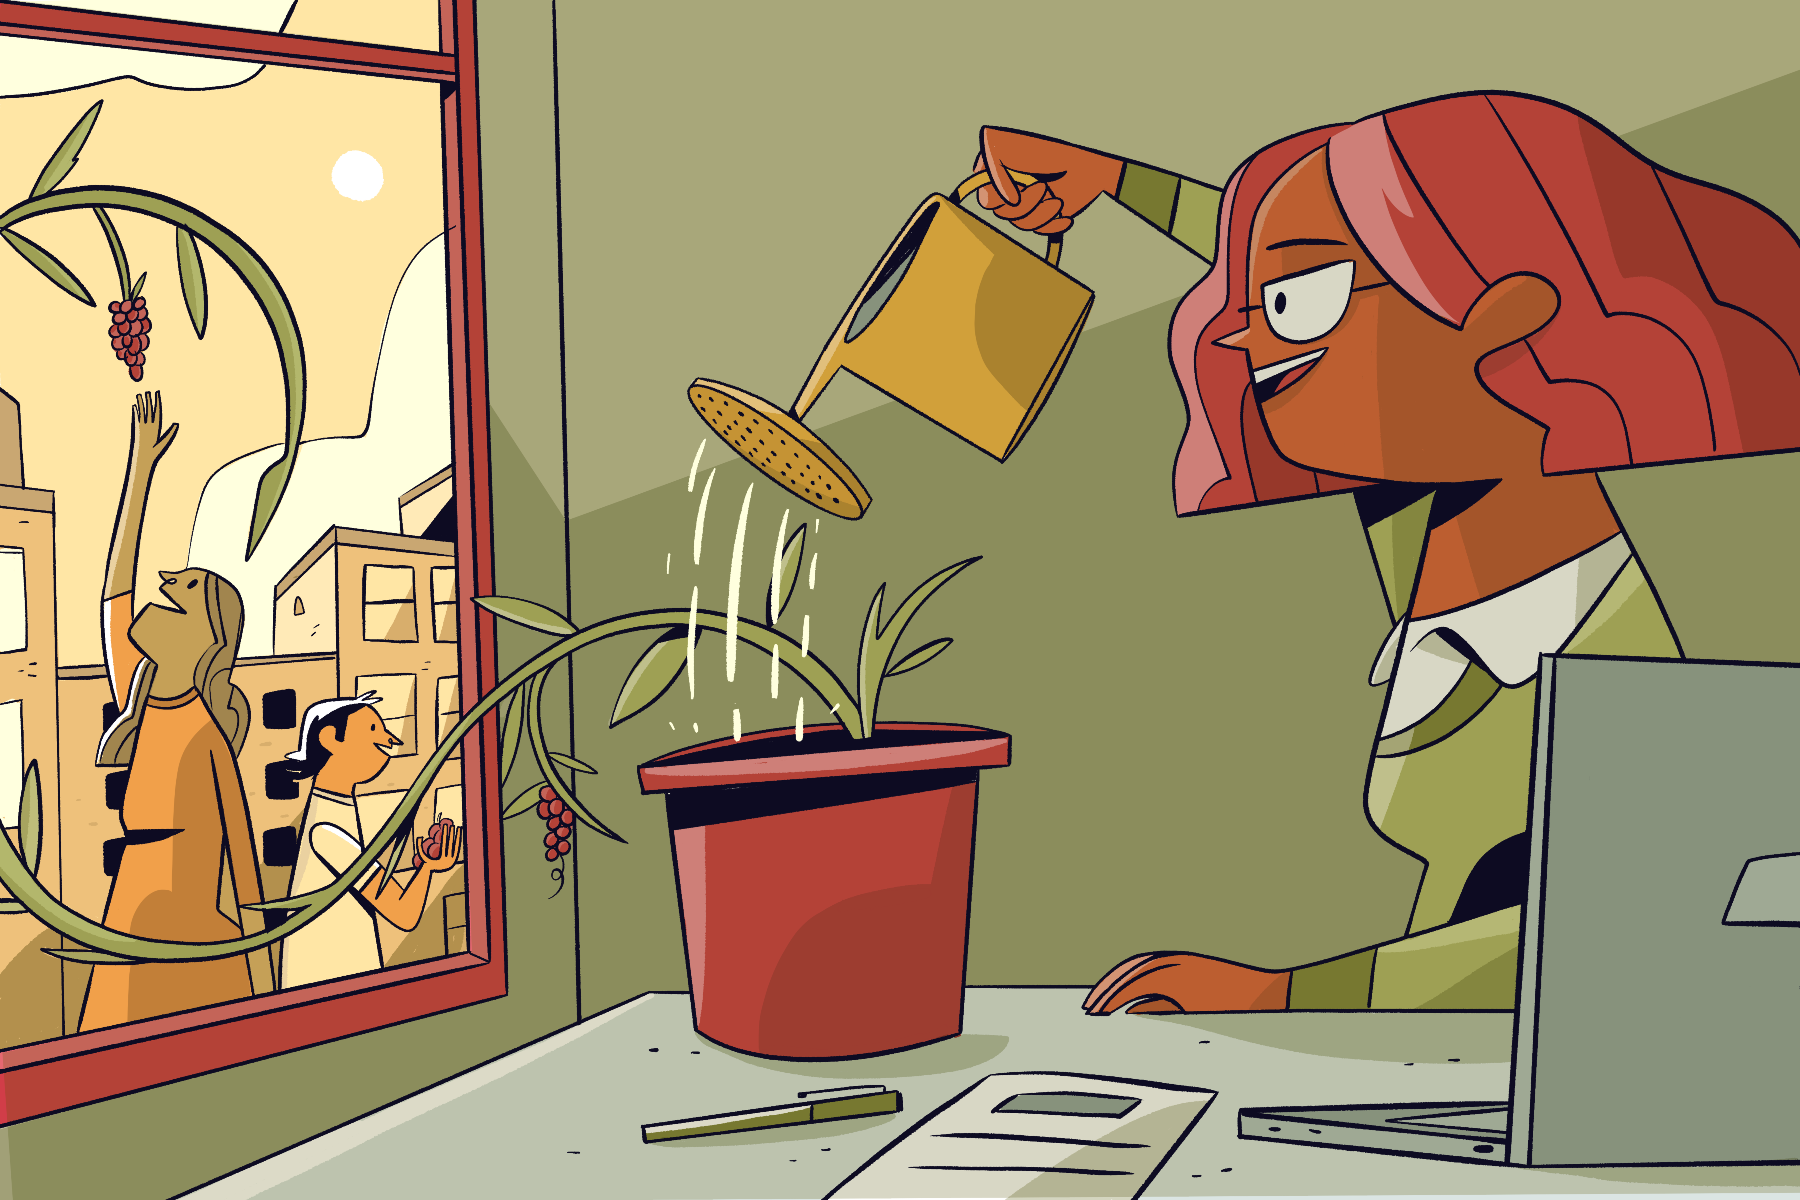 A girl waters a plant in her office and outside her community thrives